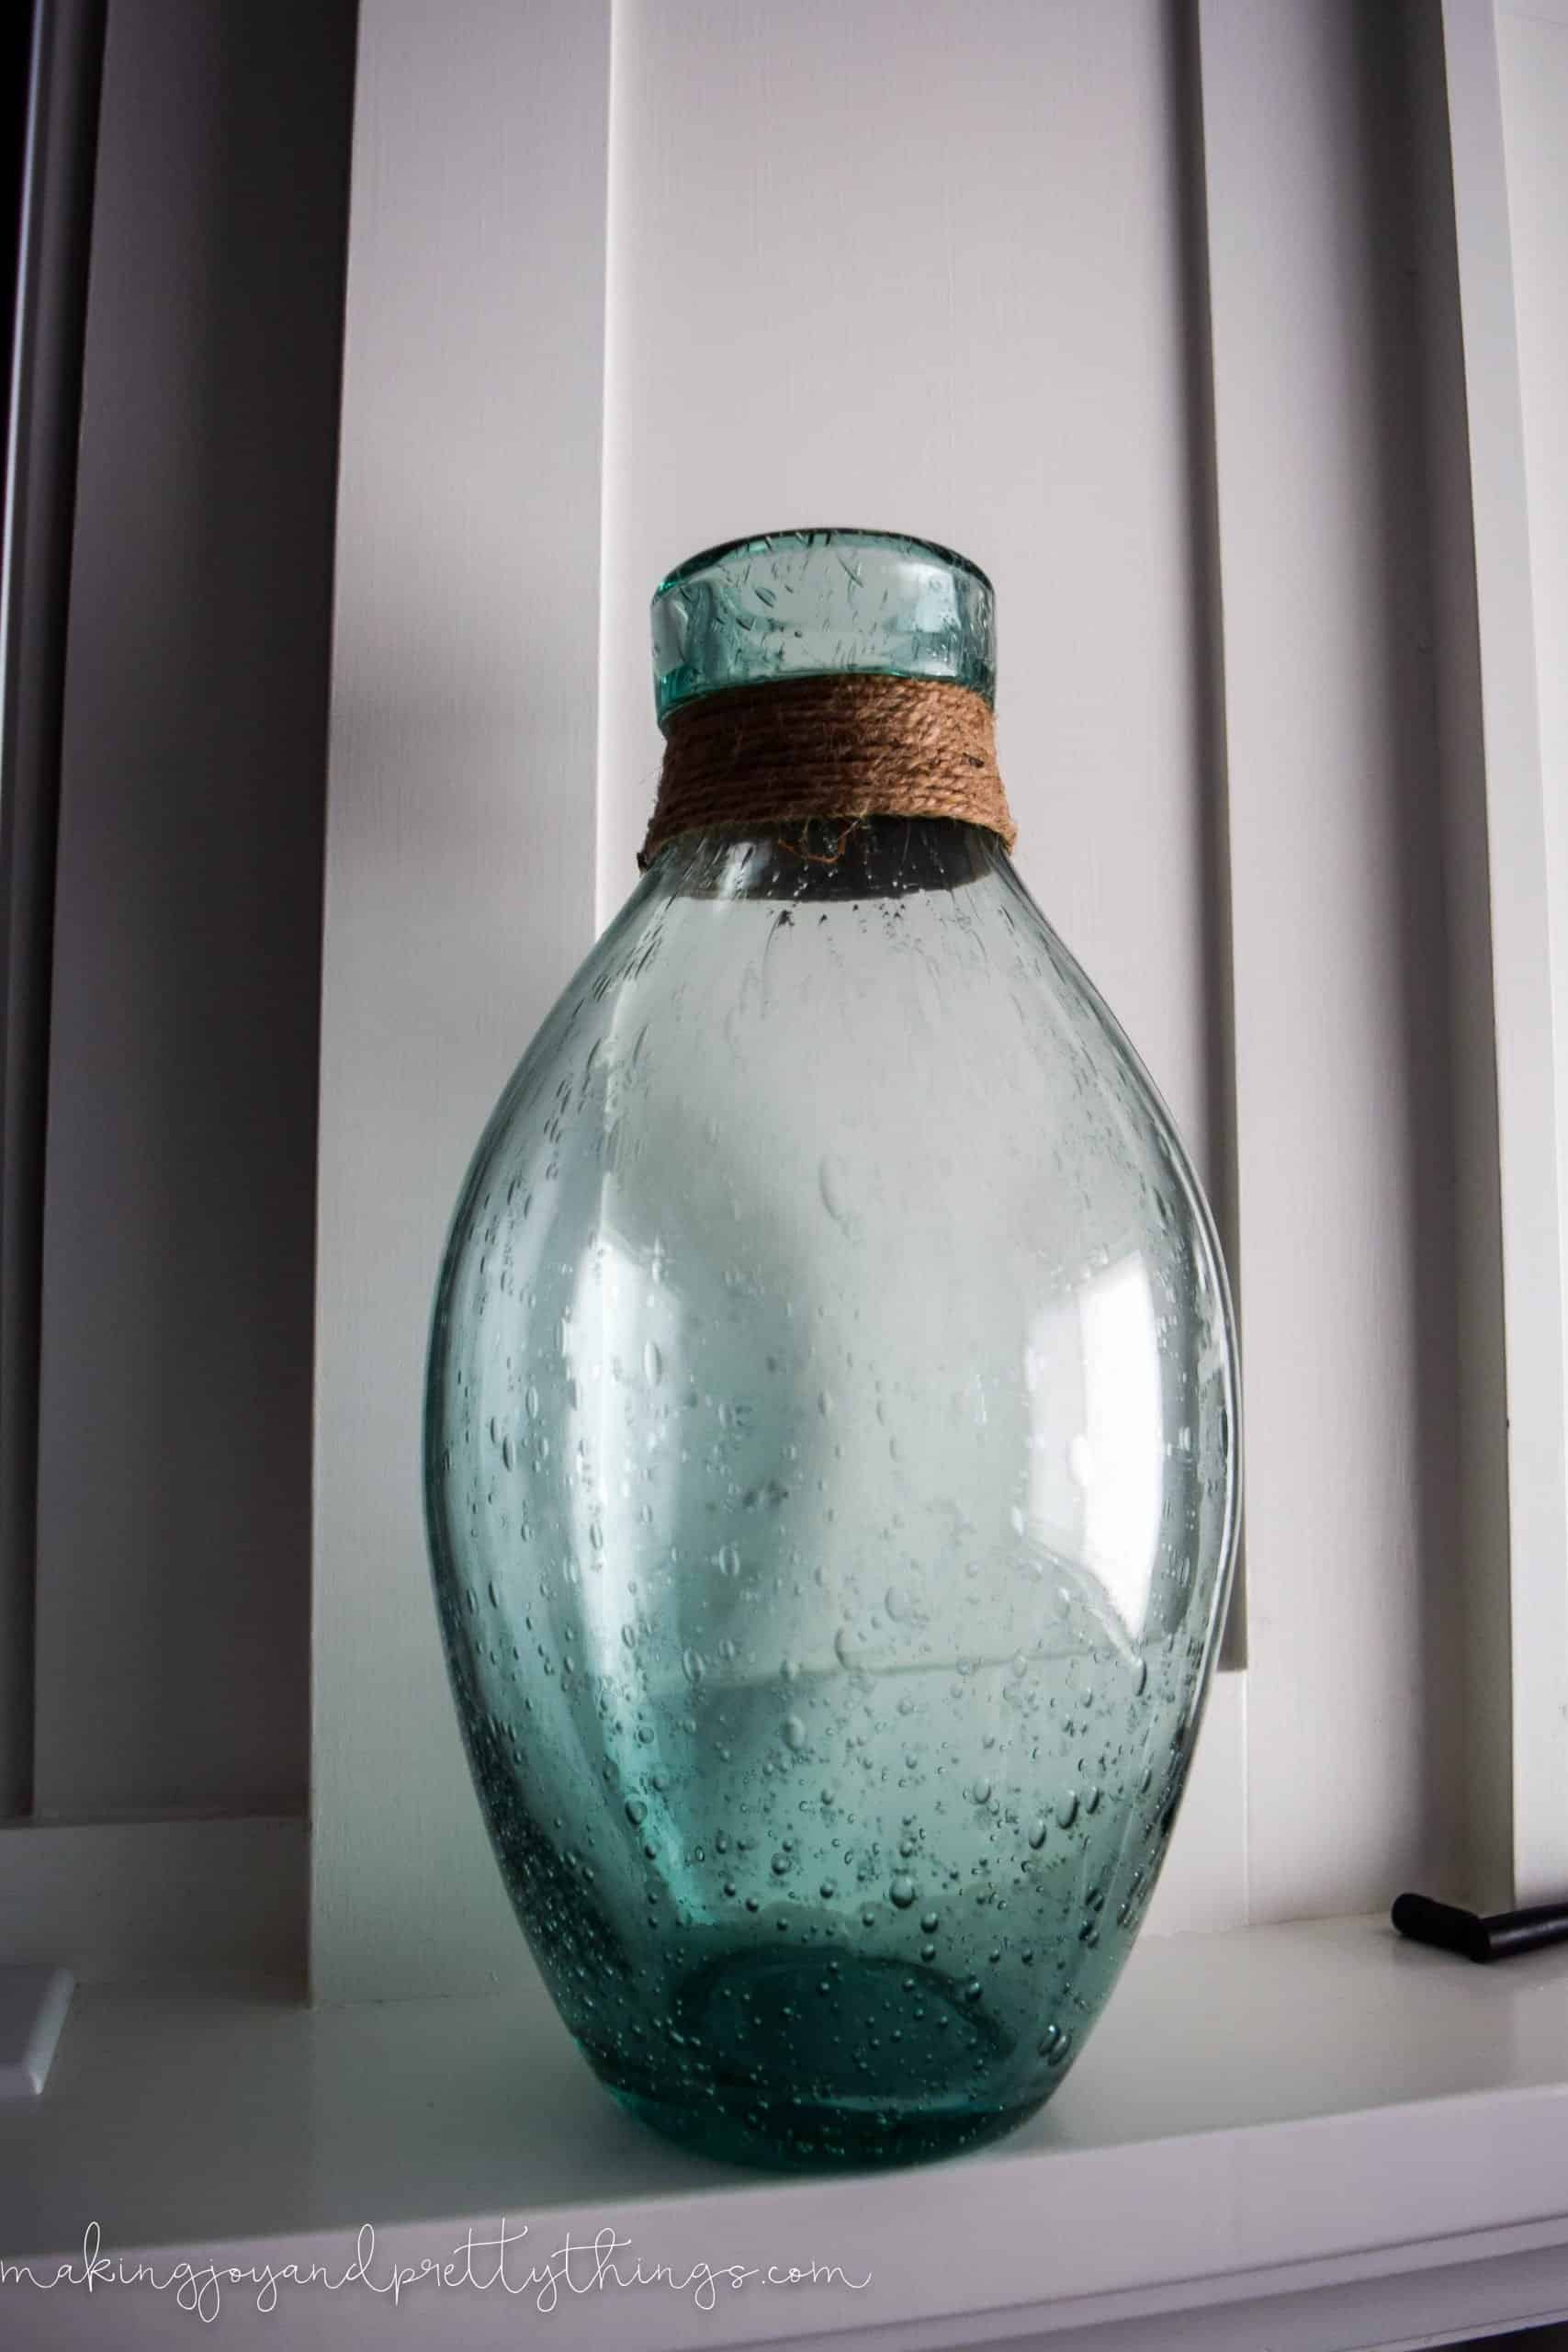 A blue seaglass bottle vase with jute string wrapped around the top. The glass vase has an ombre color effect from top to bottom, with air bubbles in the blown glass.